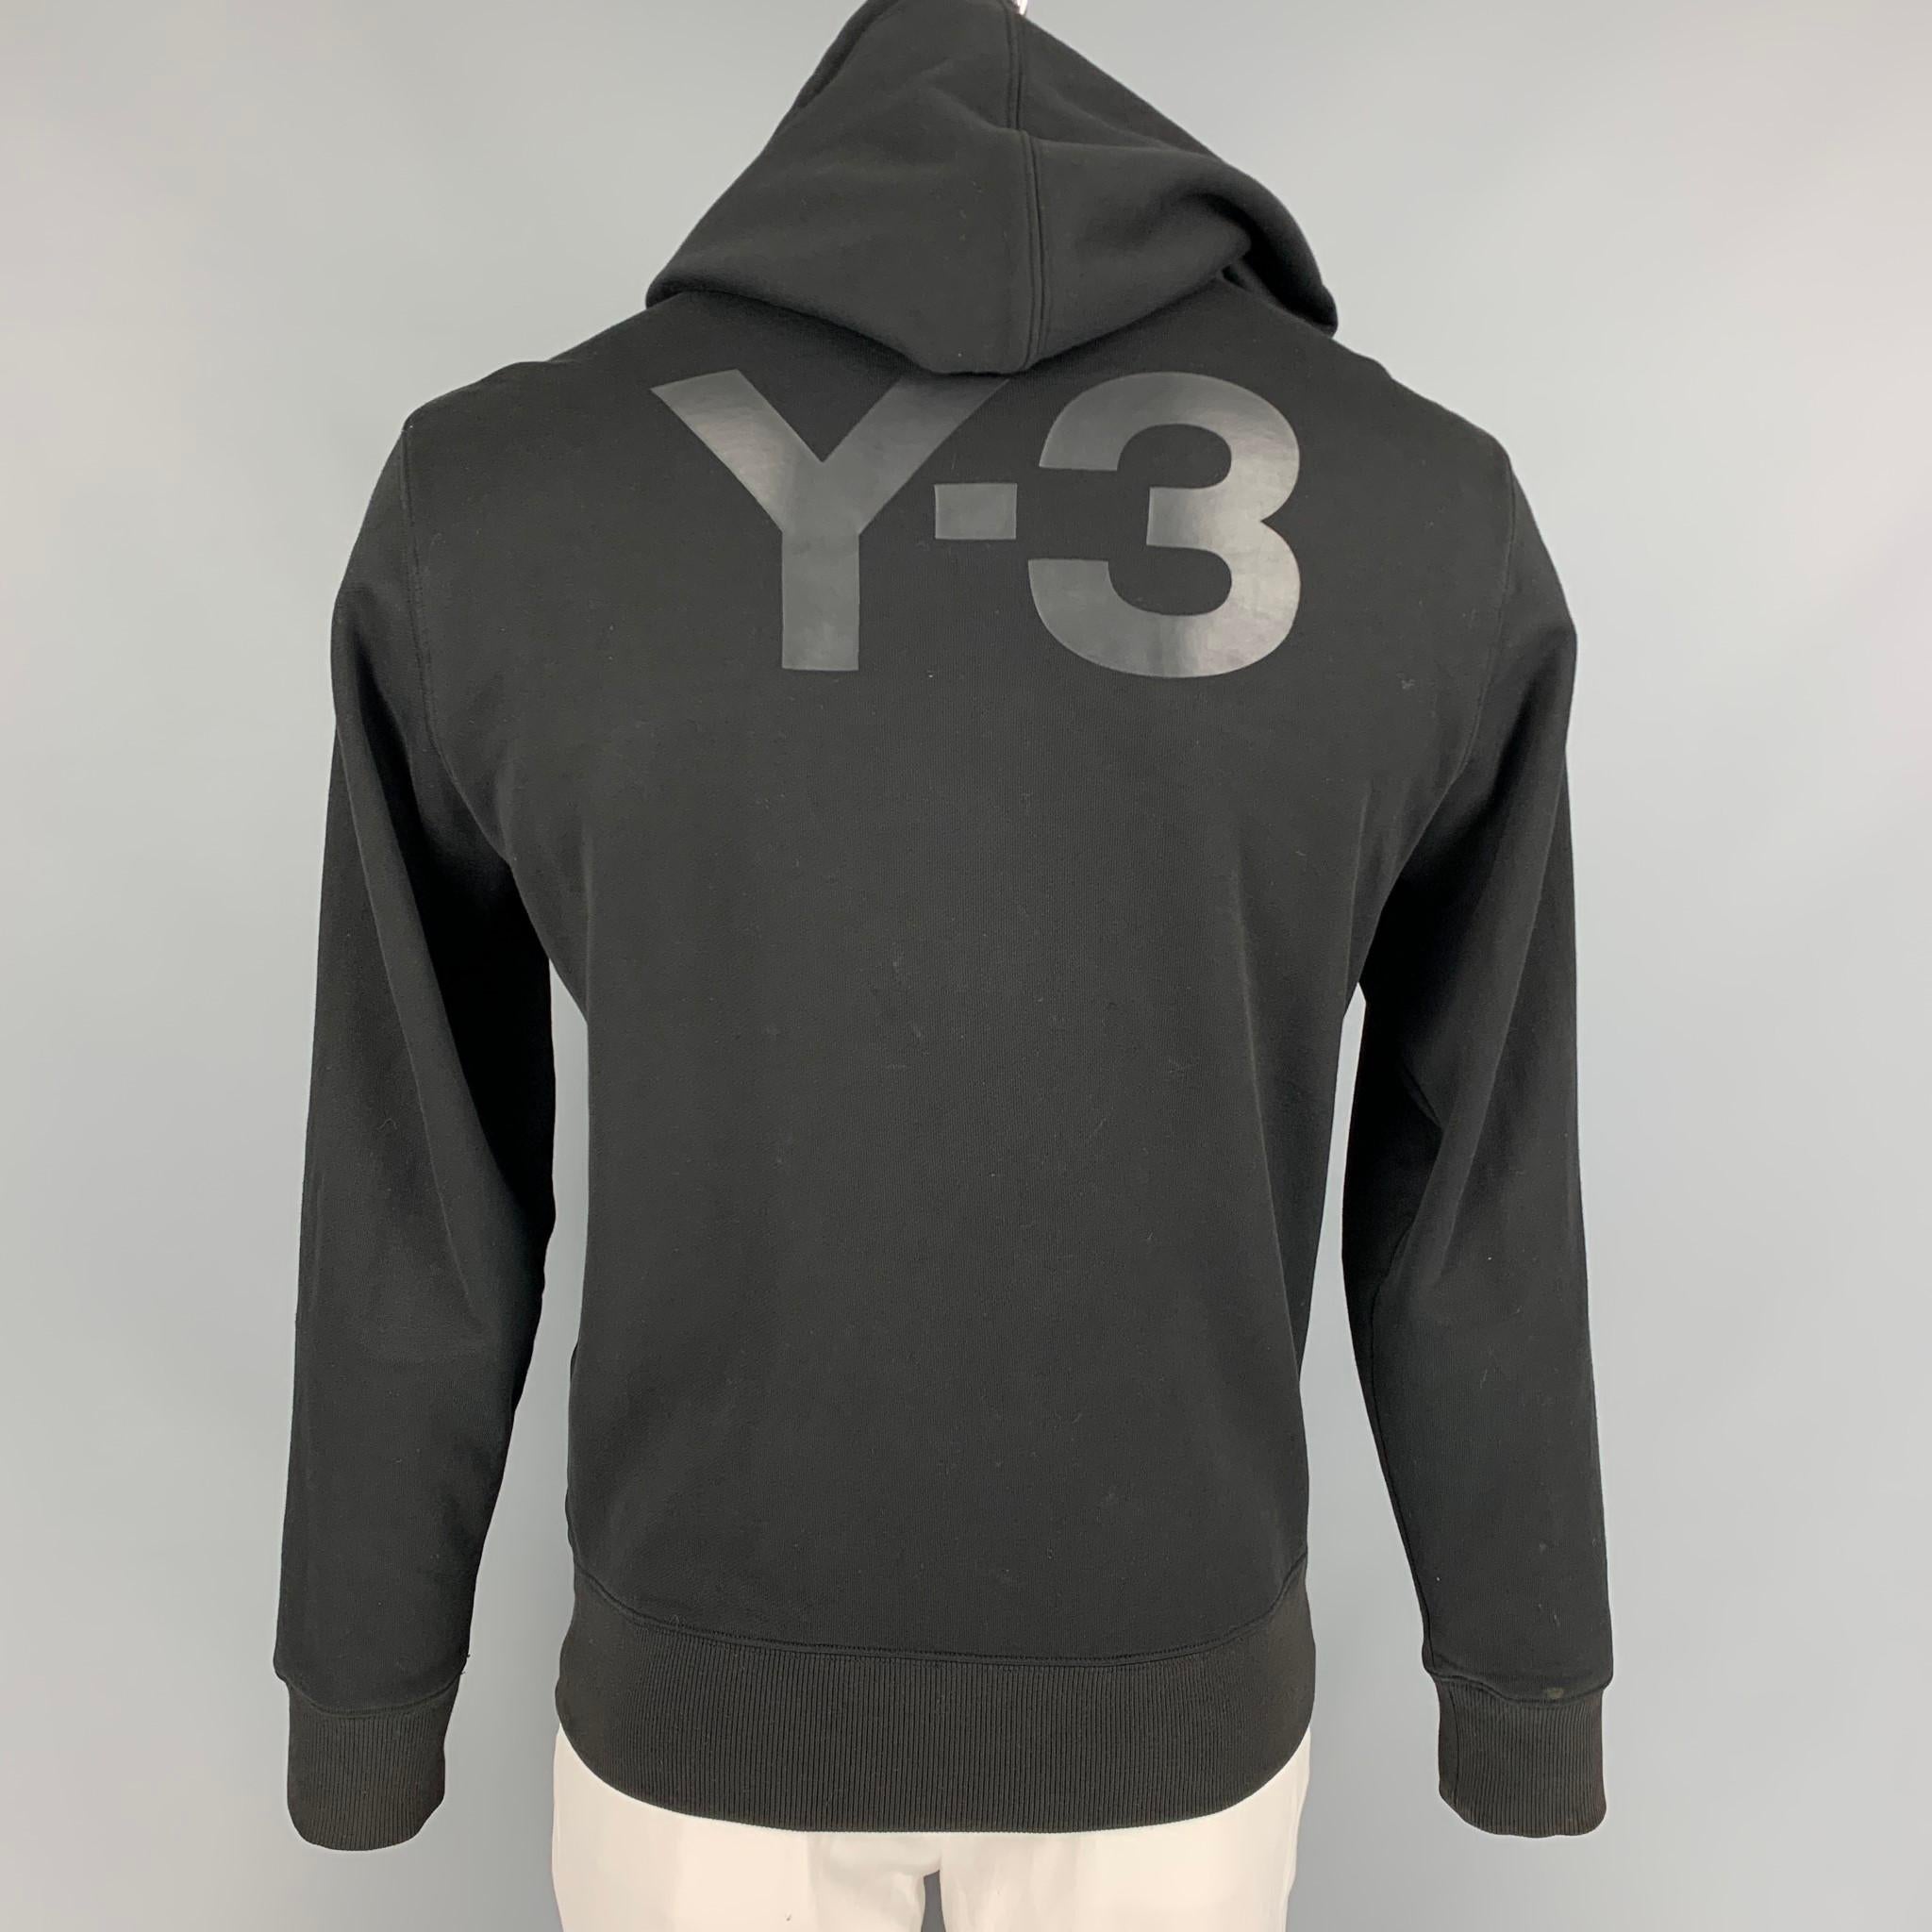 Y-3 by YOHJI YAMAMOTO jacket comes in a black cotton featuring a hooded style, back logo detail, and a full zip closure. 

Very Good Pre-Owned Condition.
Marked: L

Measurements:

Shoulder: 20 in.
Chest: 40 in.
Sleeve: 28 in.
Length: 27 in. 